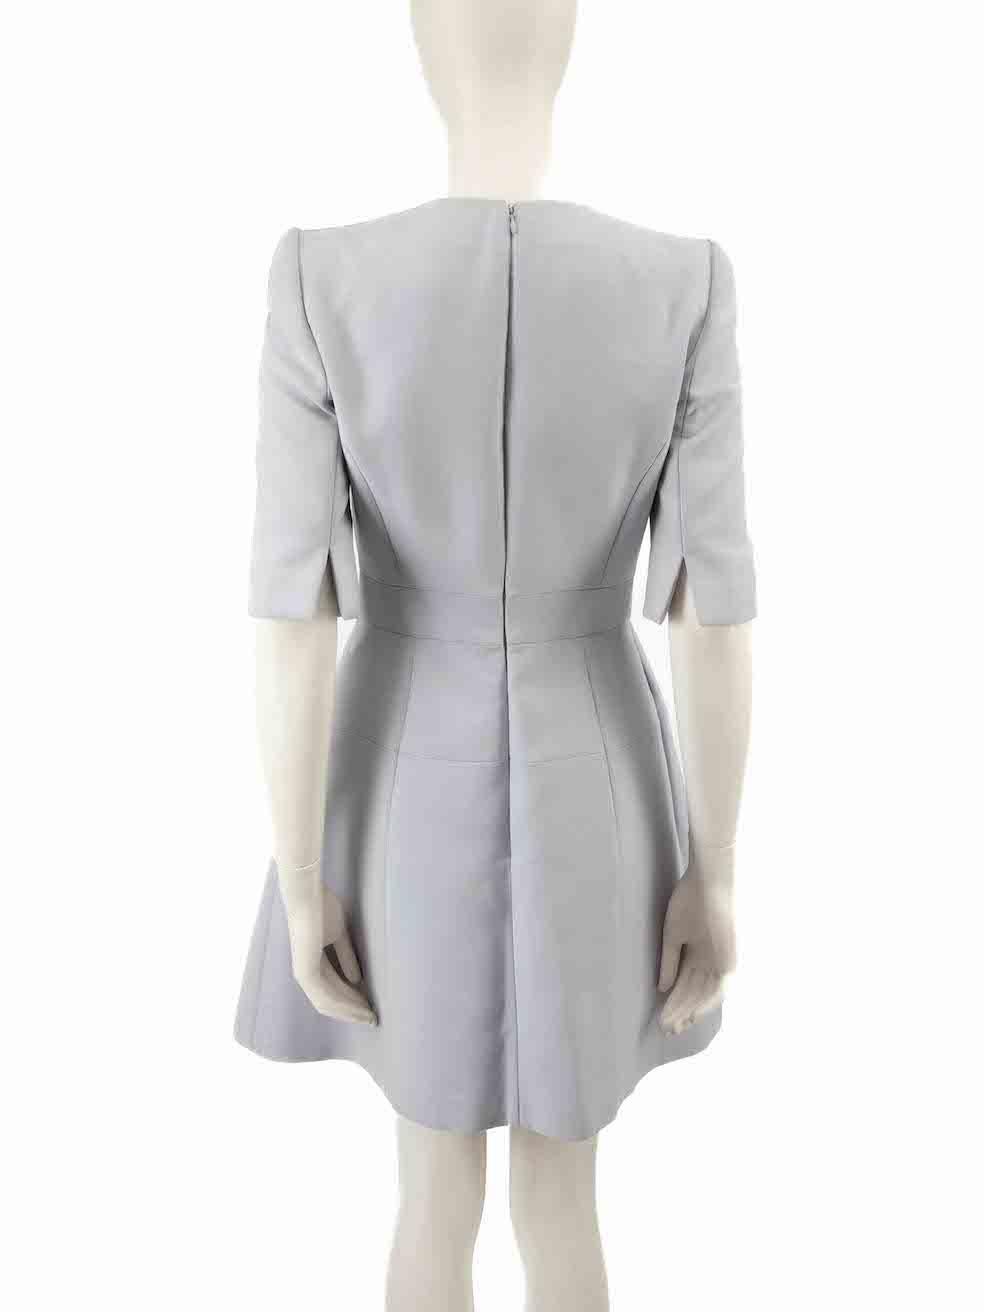 Alexander McQueen Periwinkle V Neckline Dress Size S In Good Condition For Sale In London, GB